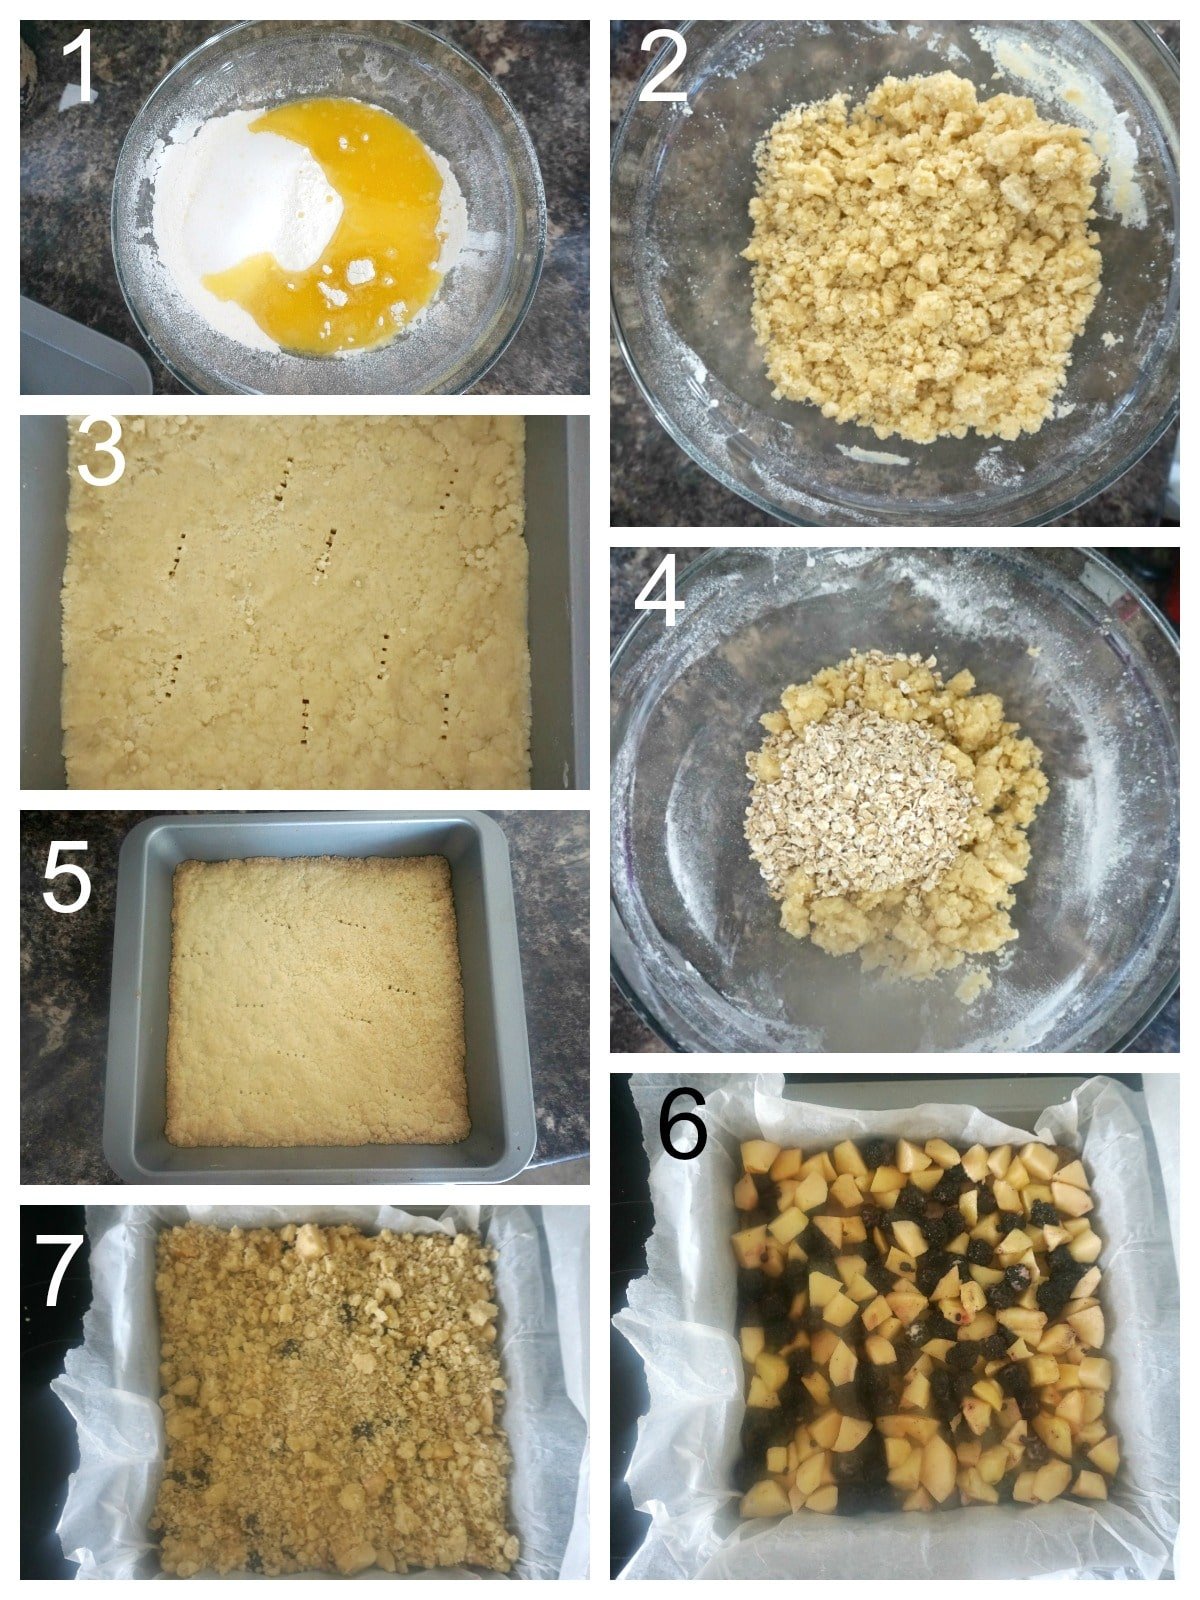 Collage of 7 photos to show how to make the crumble mixture for the bars.